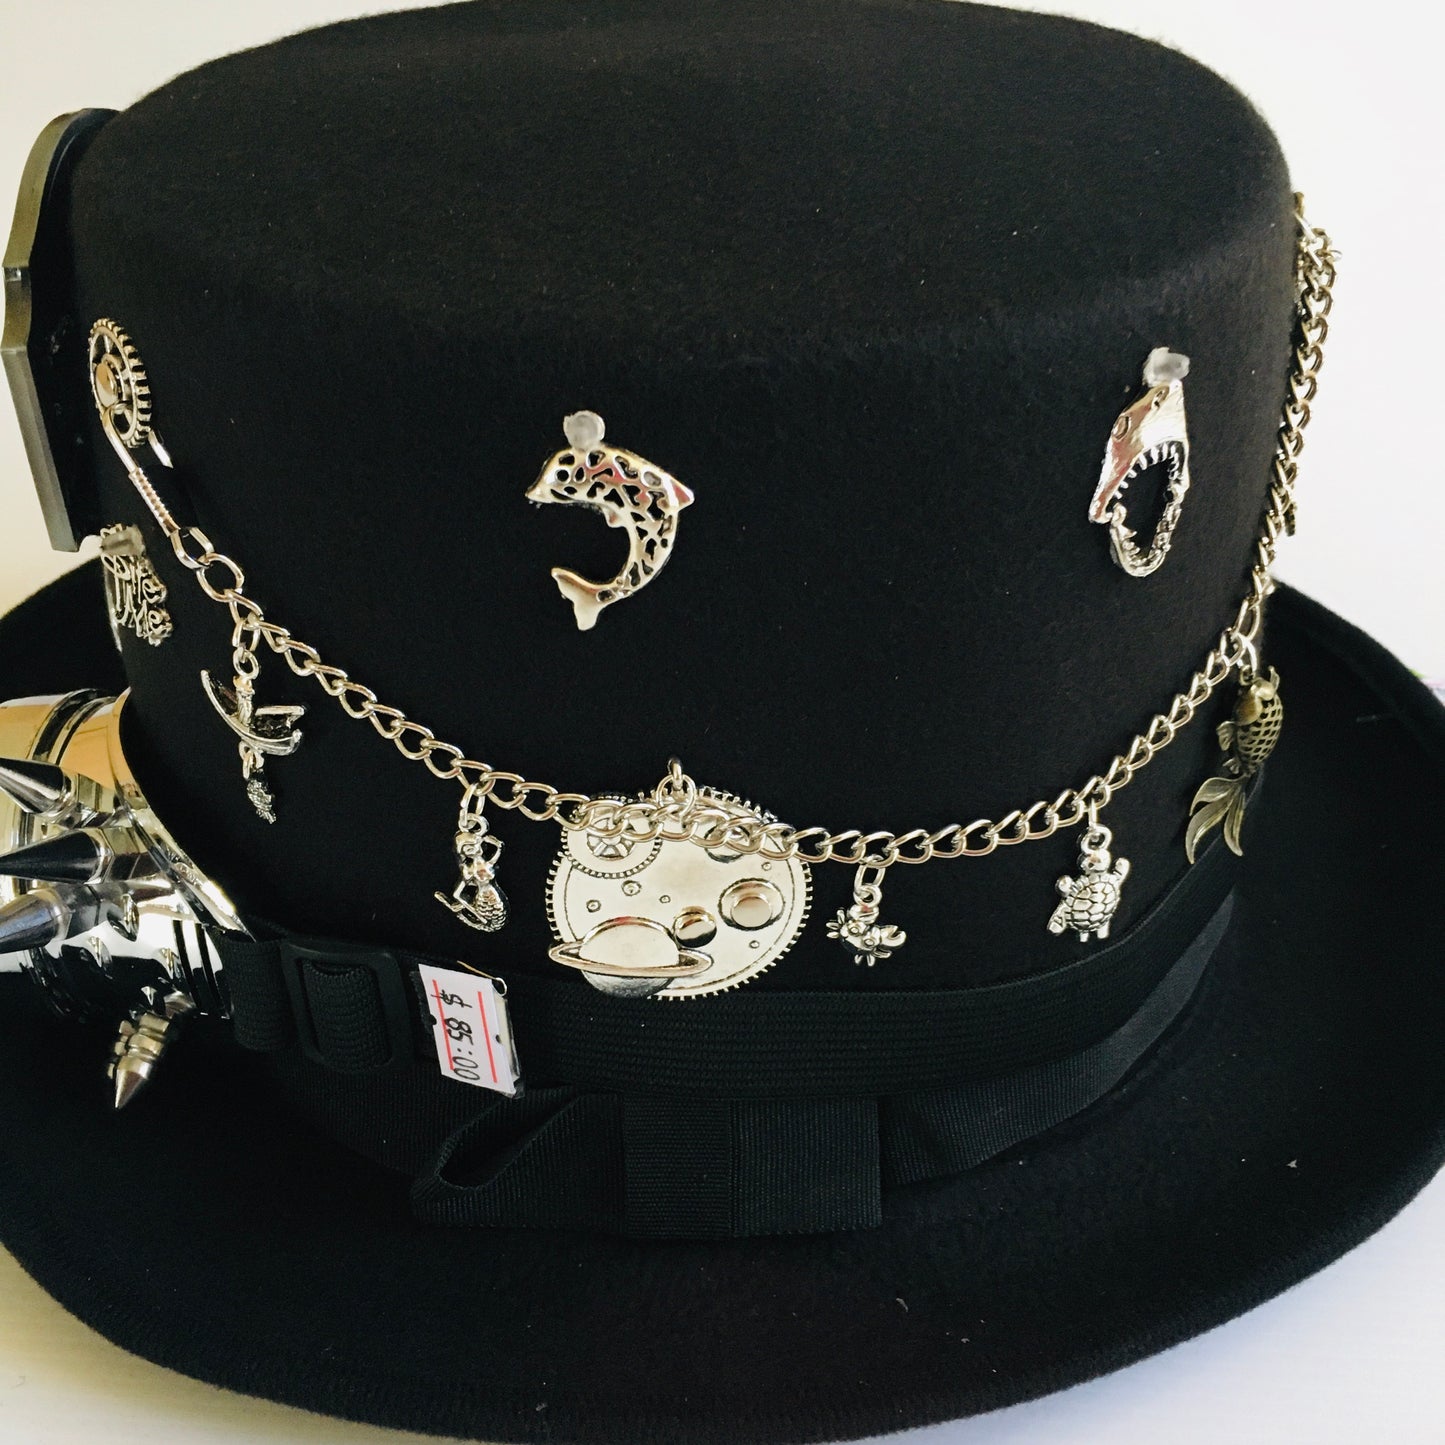 Steampunk Style Top Hat with  Fishing Belt Buckle and silver spiked  goggles (Item #42)